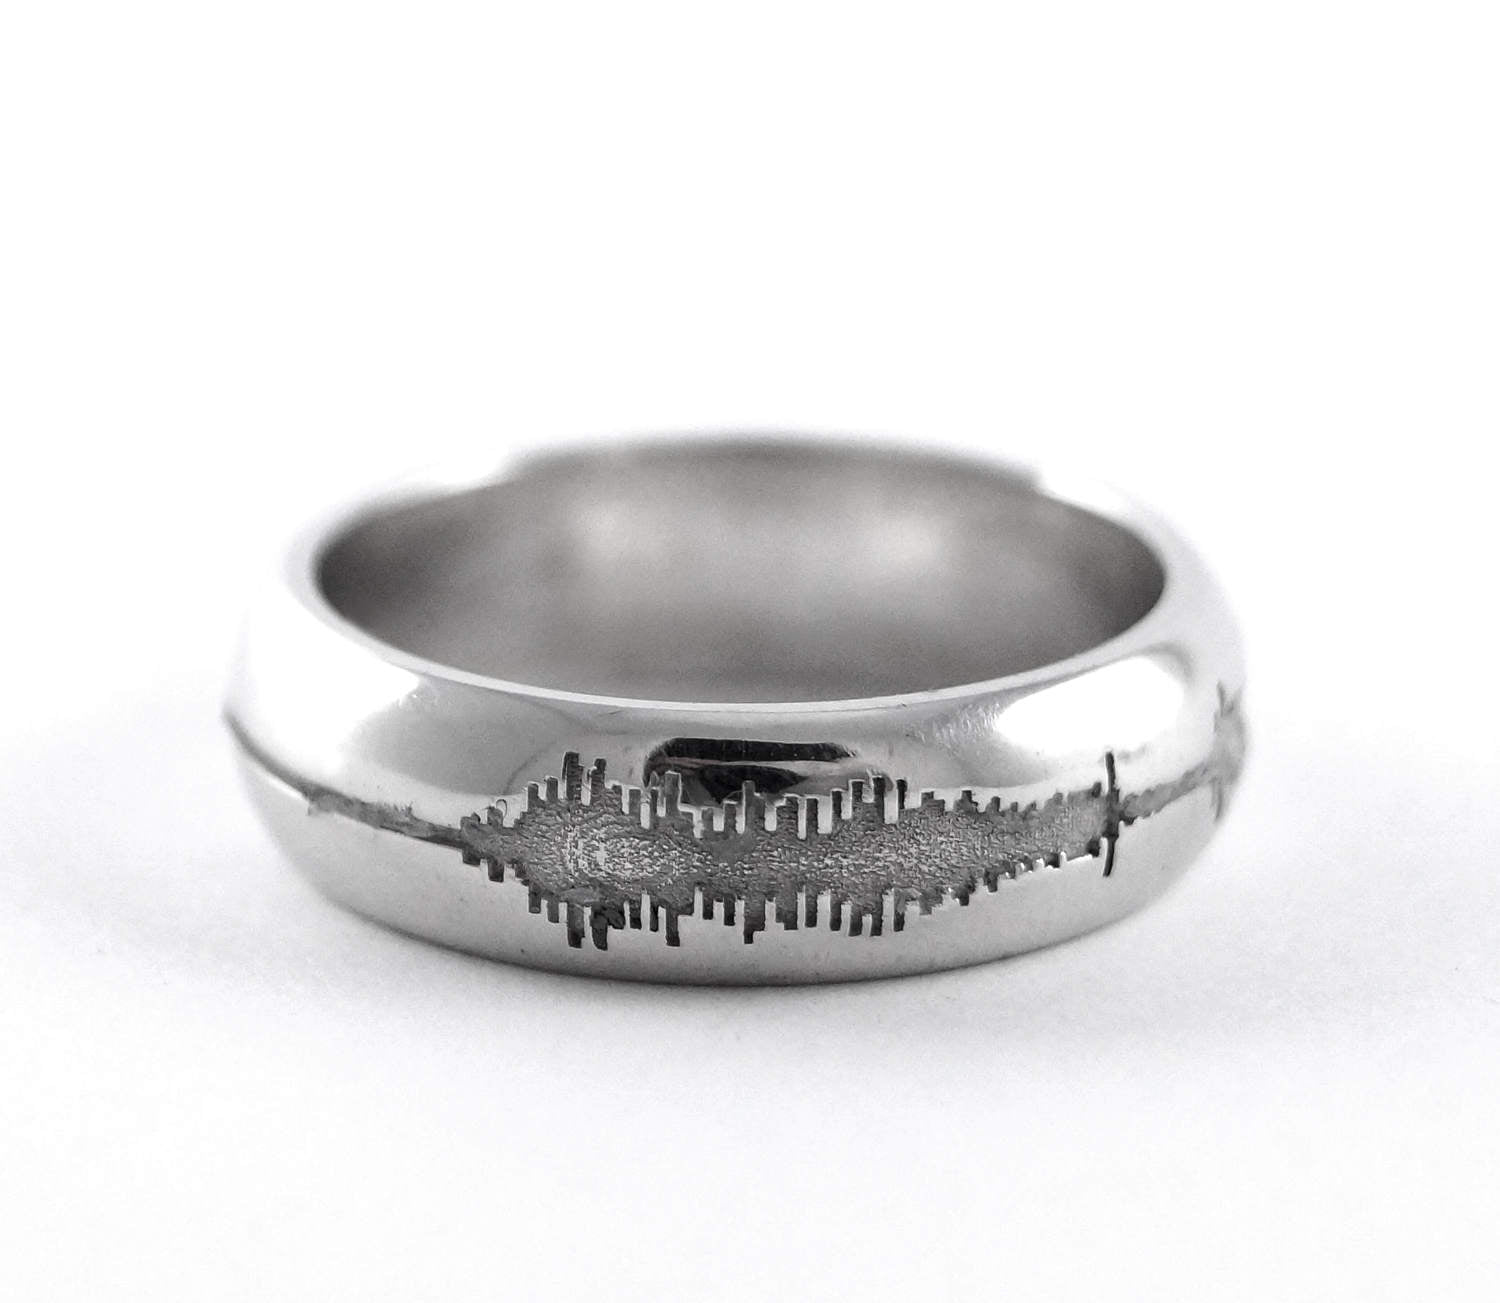 Sounds of Love - CAD 3D Printed Personalized Unisex Sound Wave Wedding Ring, Nerd Music Ring, Geek Wedding Ring, Geekery, Geek Chic, Mens